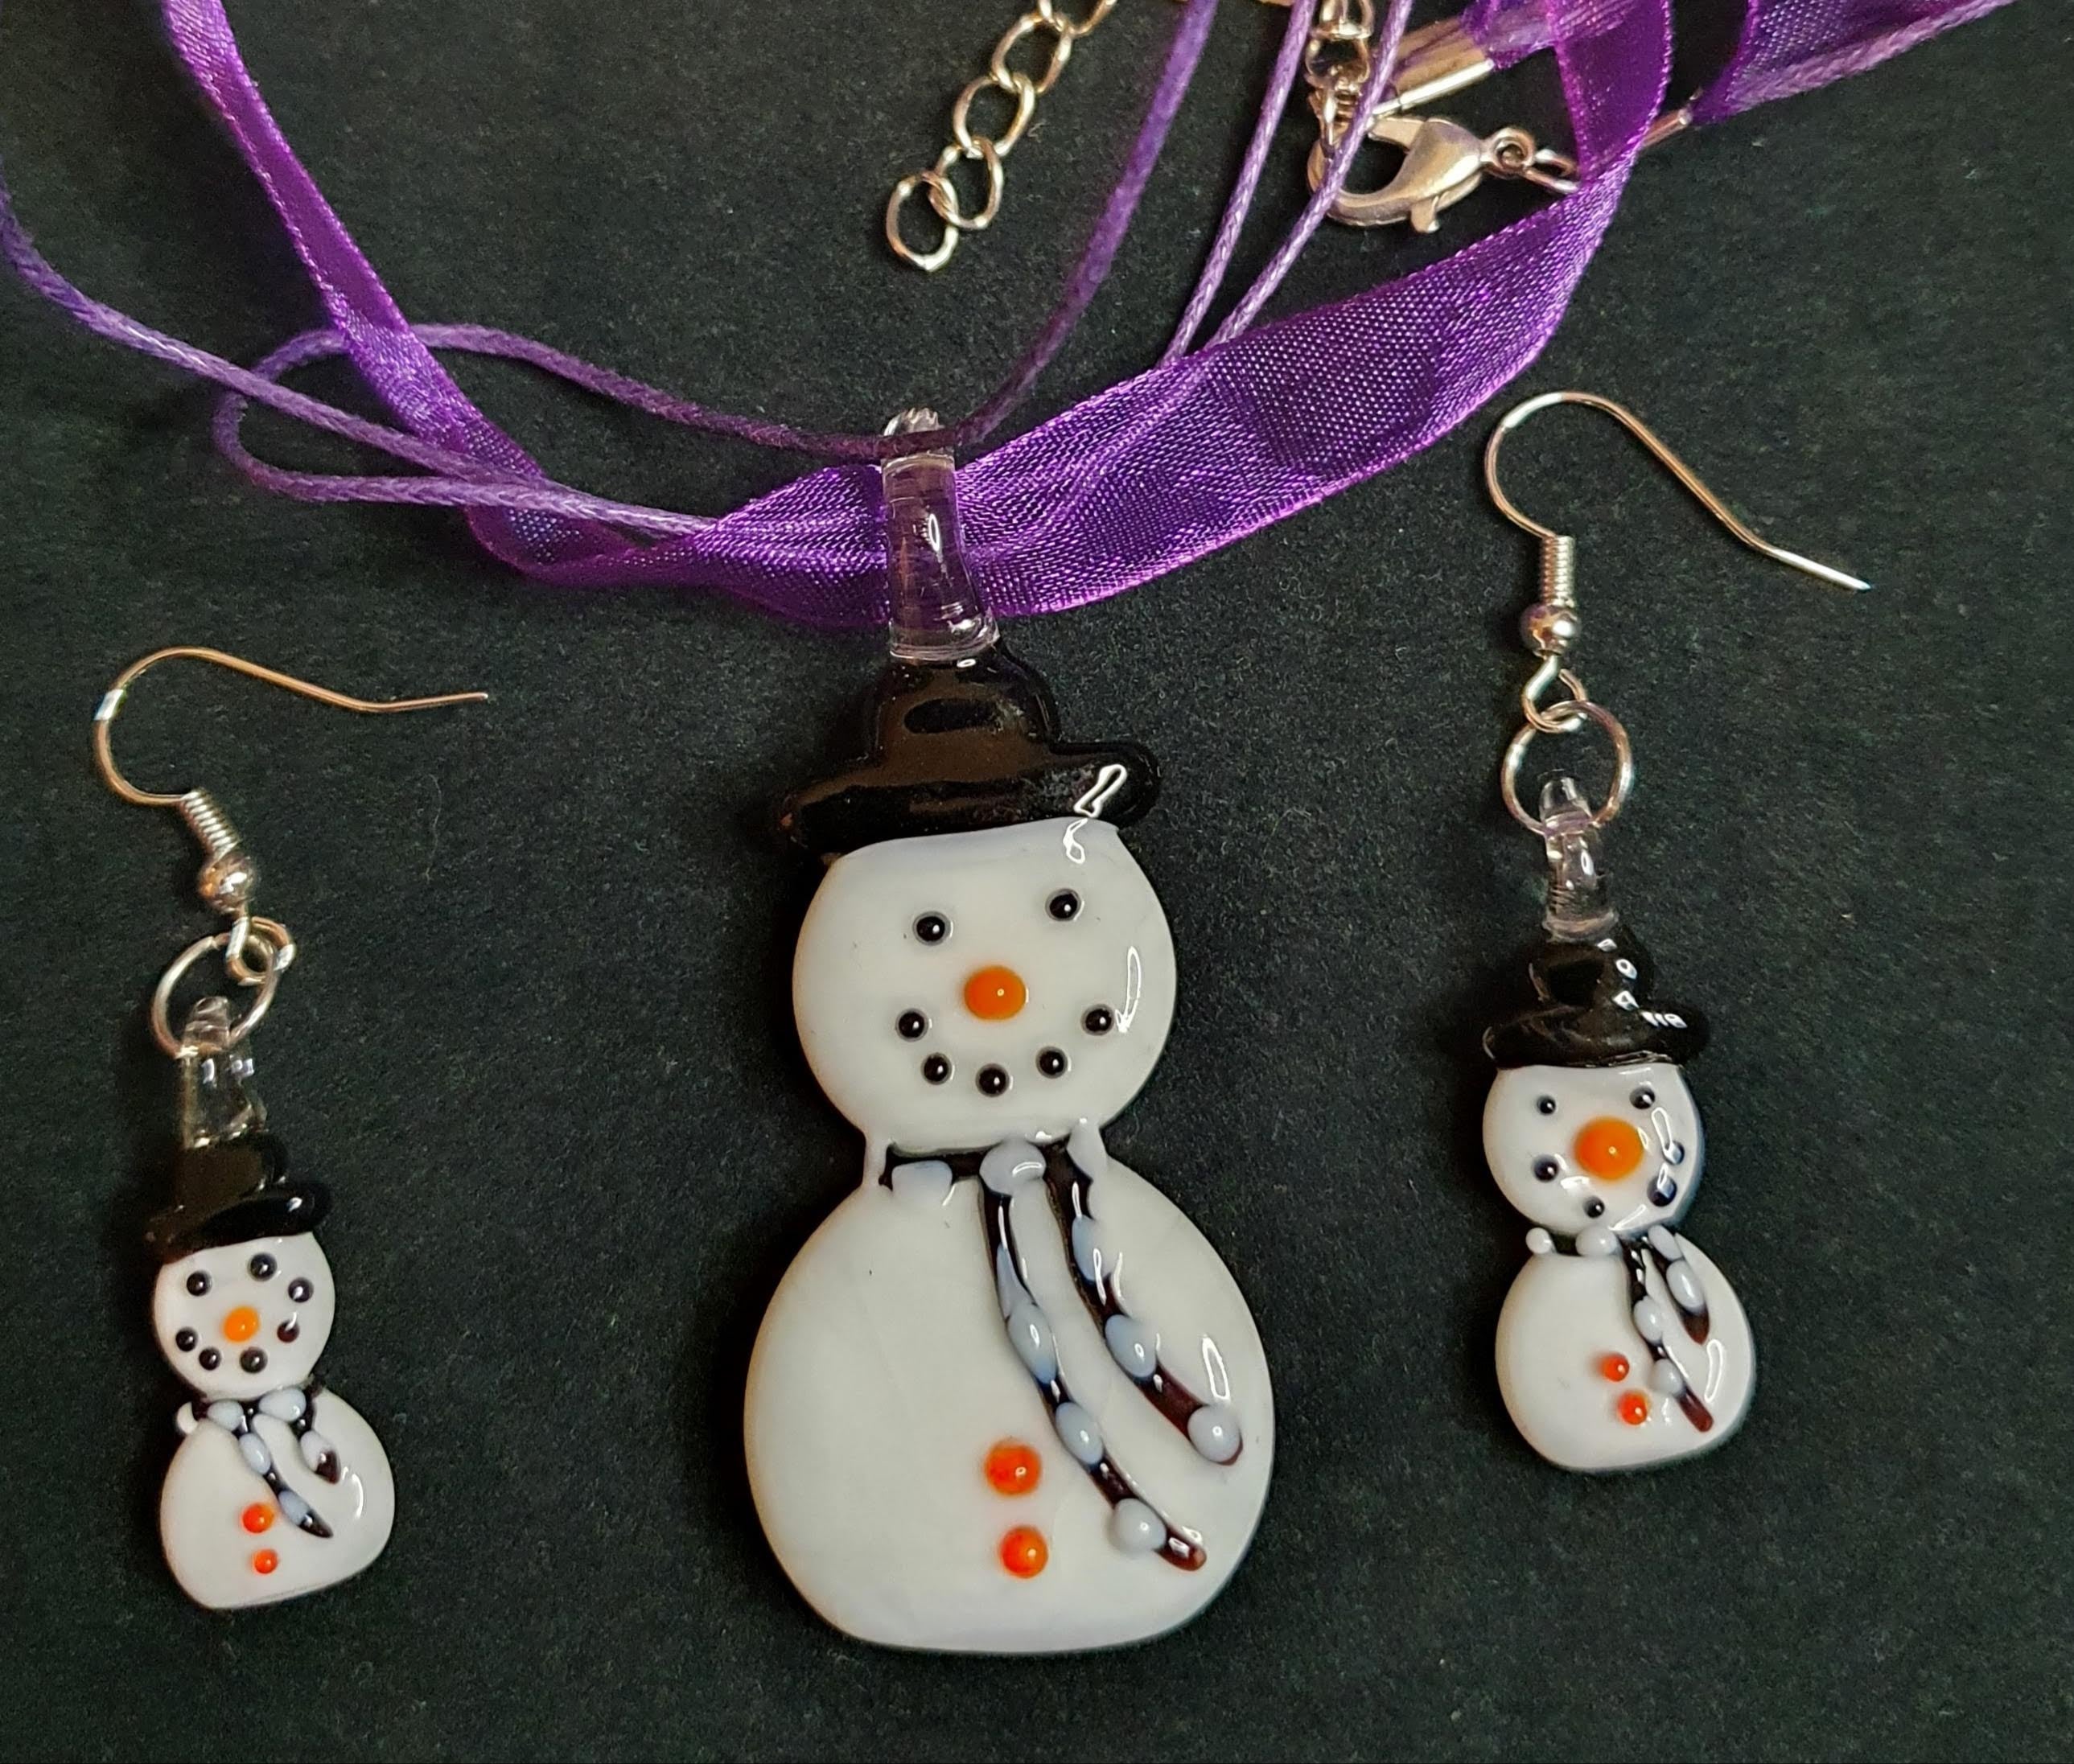 This is a picture of a snowman jewellery set